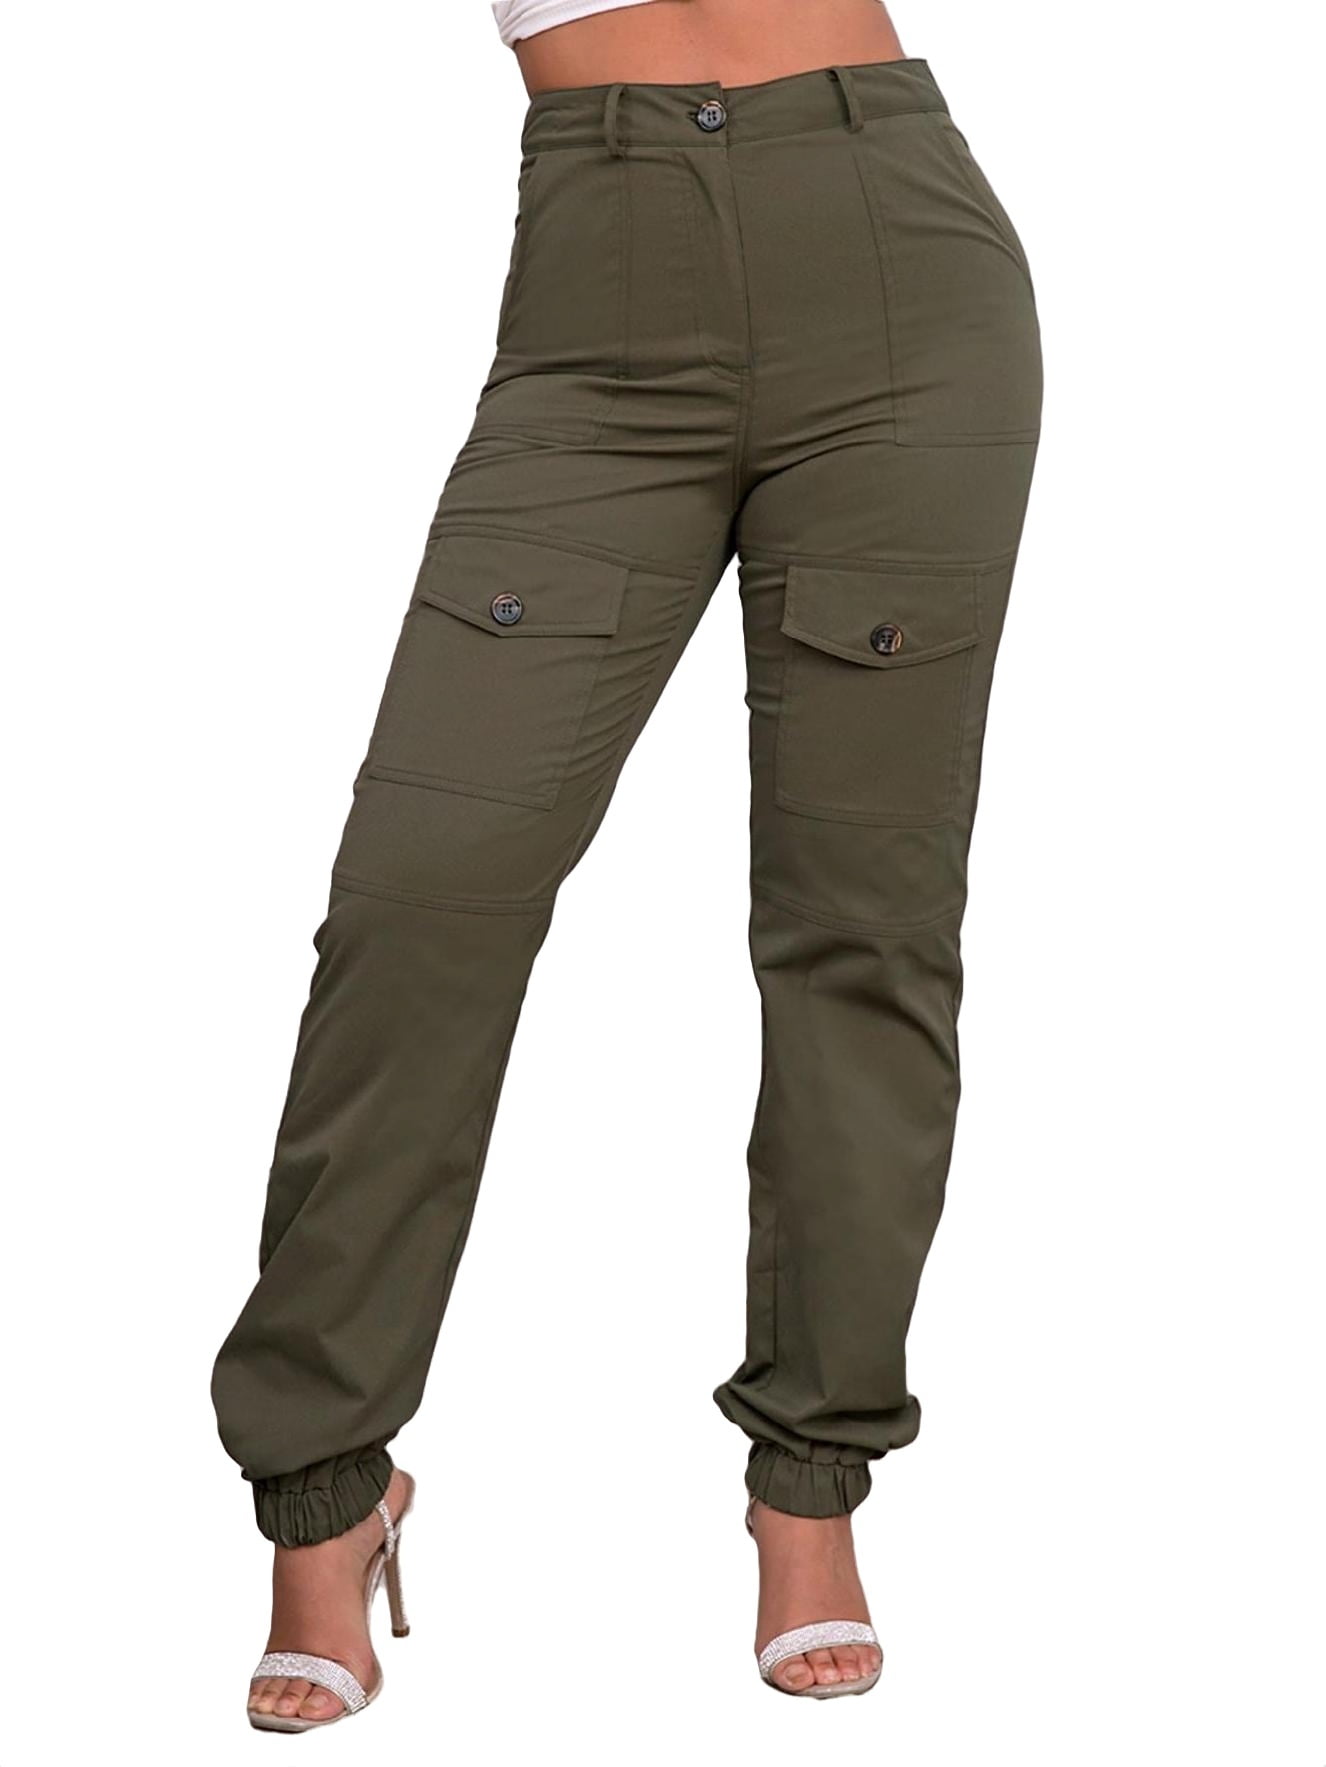 UHUYA Womens Cargo Pants Solid Color Lace-Up Elastic Waist Pockets Casual  Work Pants Army Green M US:6